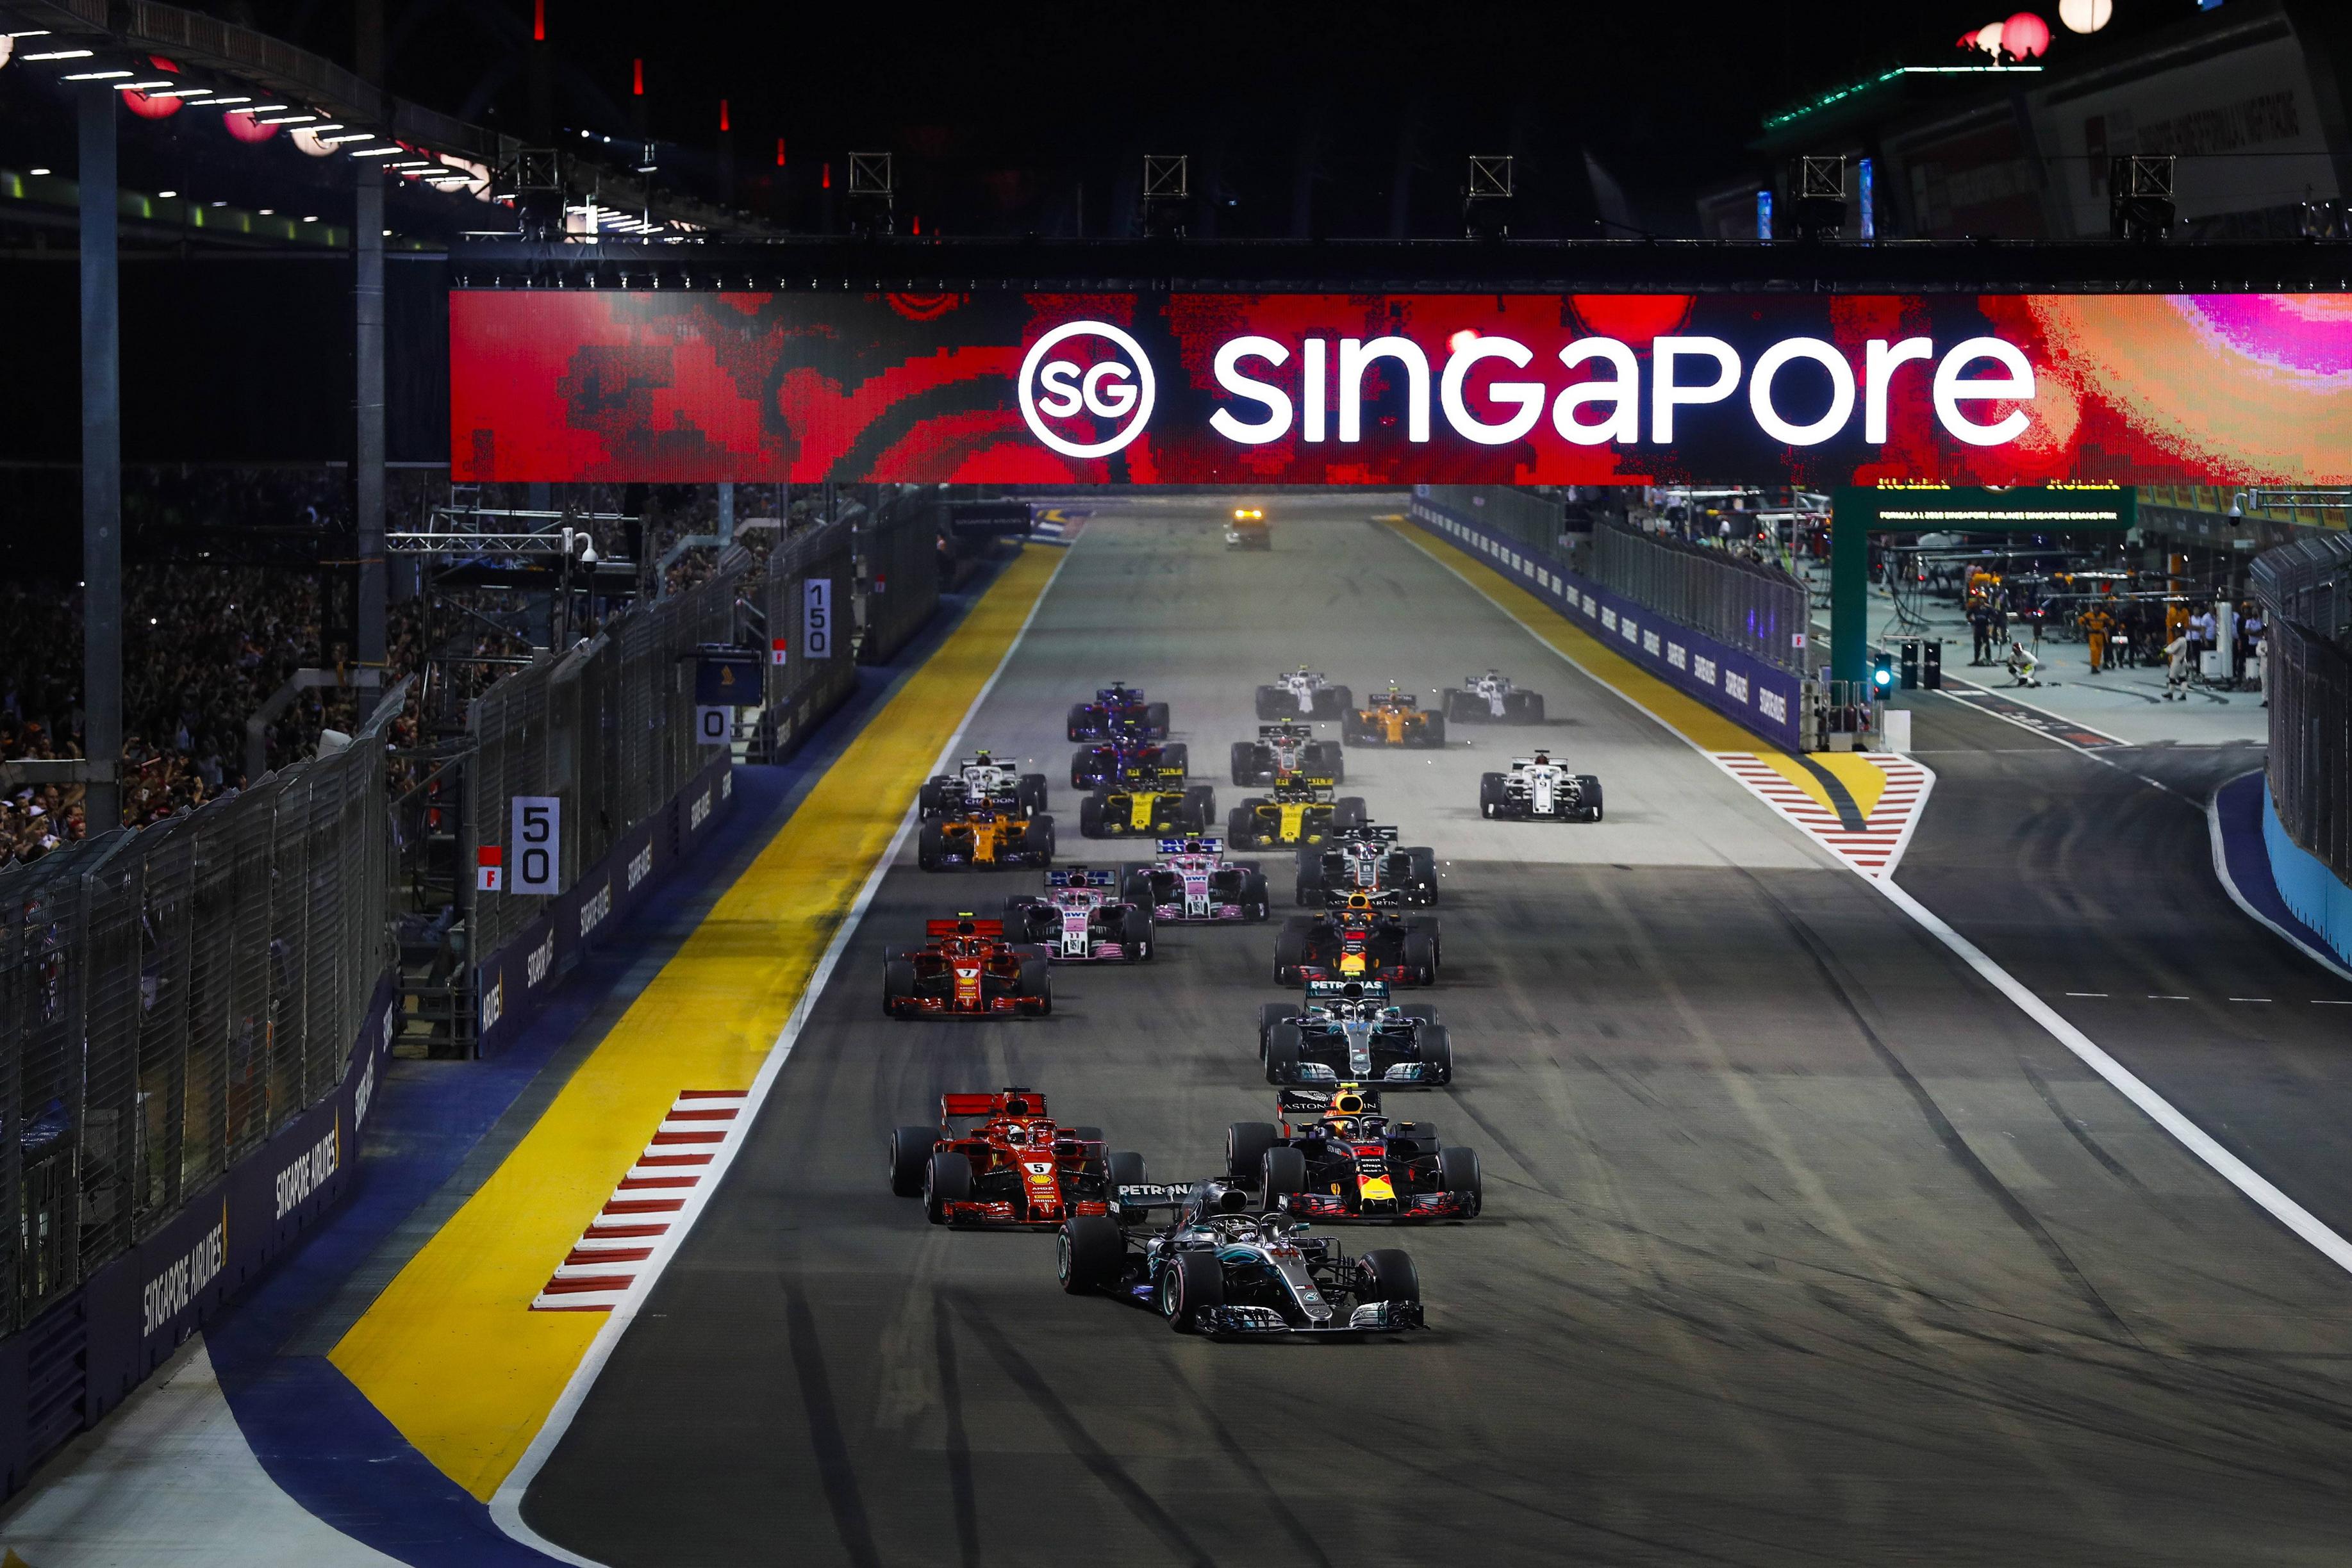 Discover On Track Race Action And Off Track Entertainment At The Singapore Grand Prix